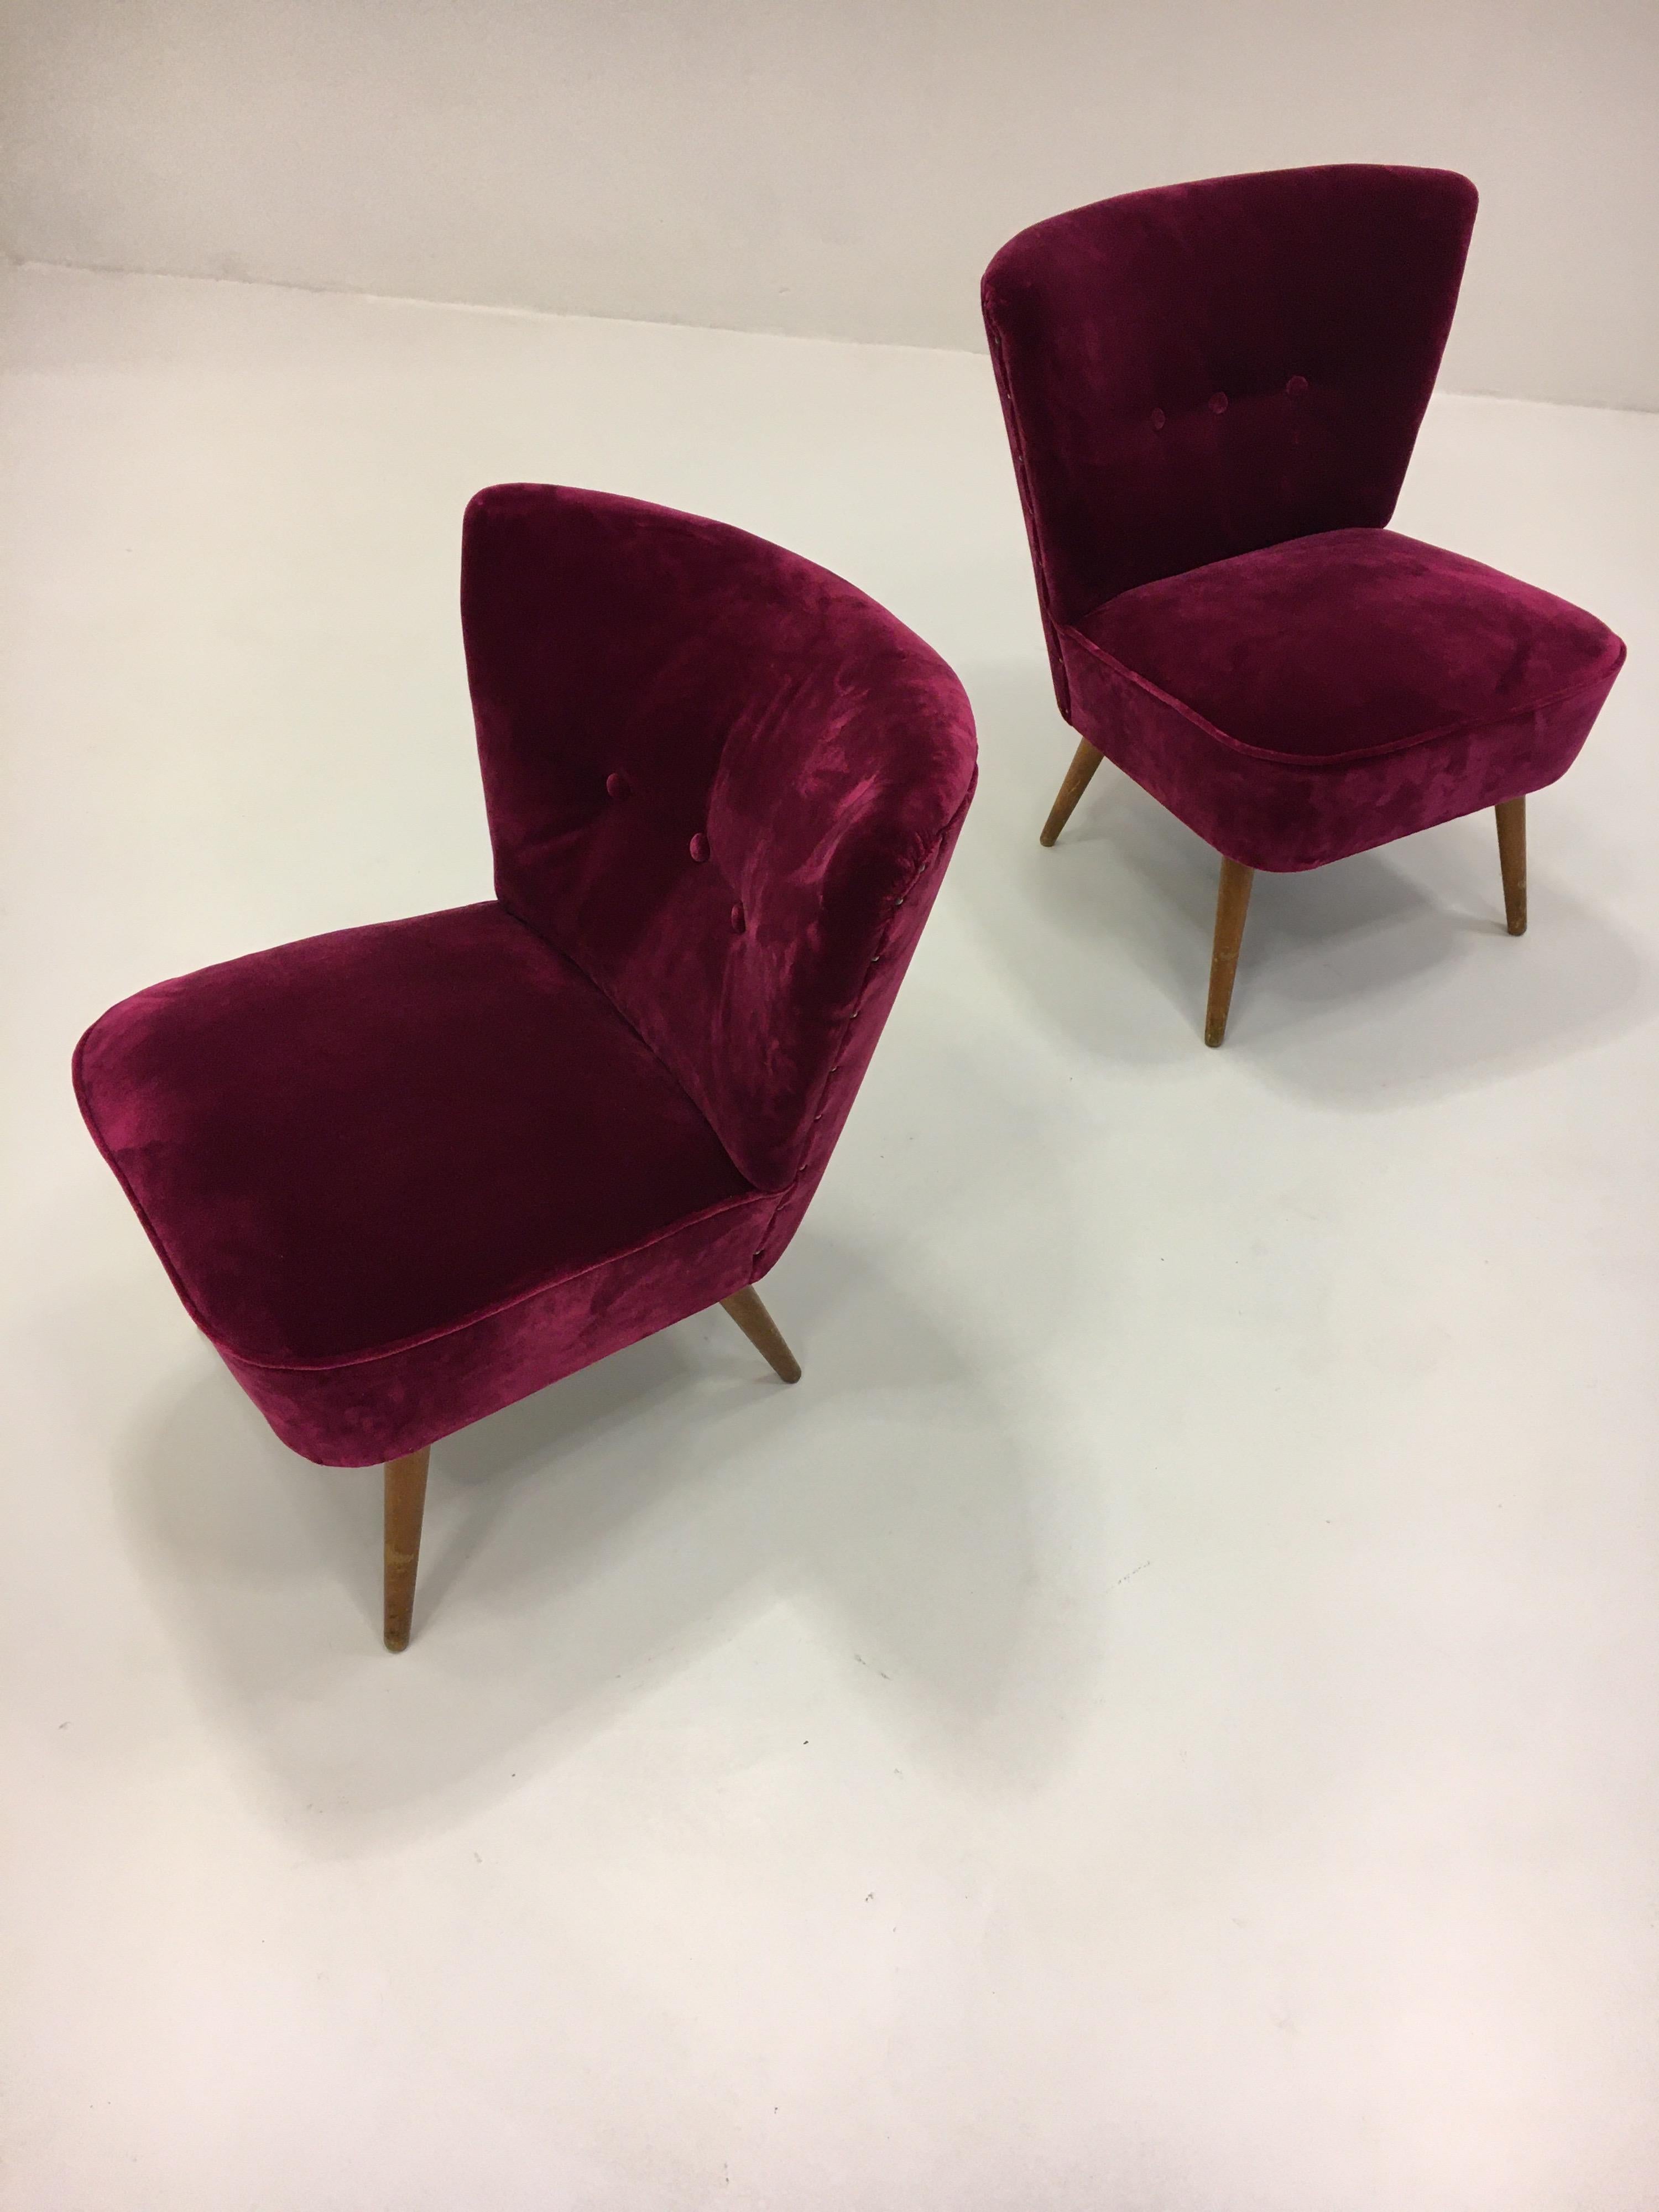 Mid-Century Modern Cocktail Chairs, France, 1950s For Sale 1